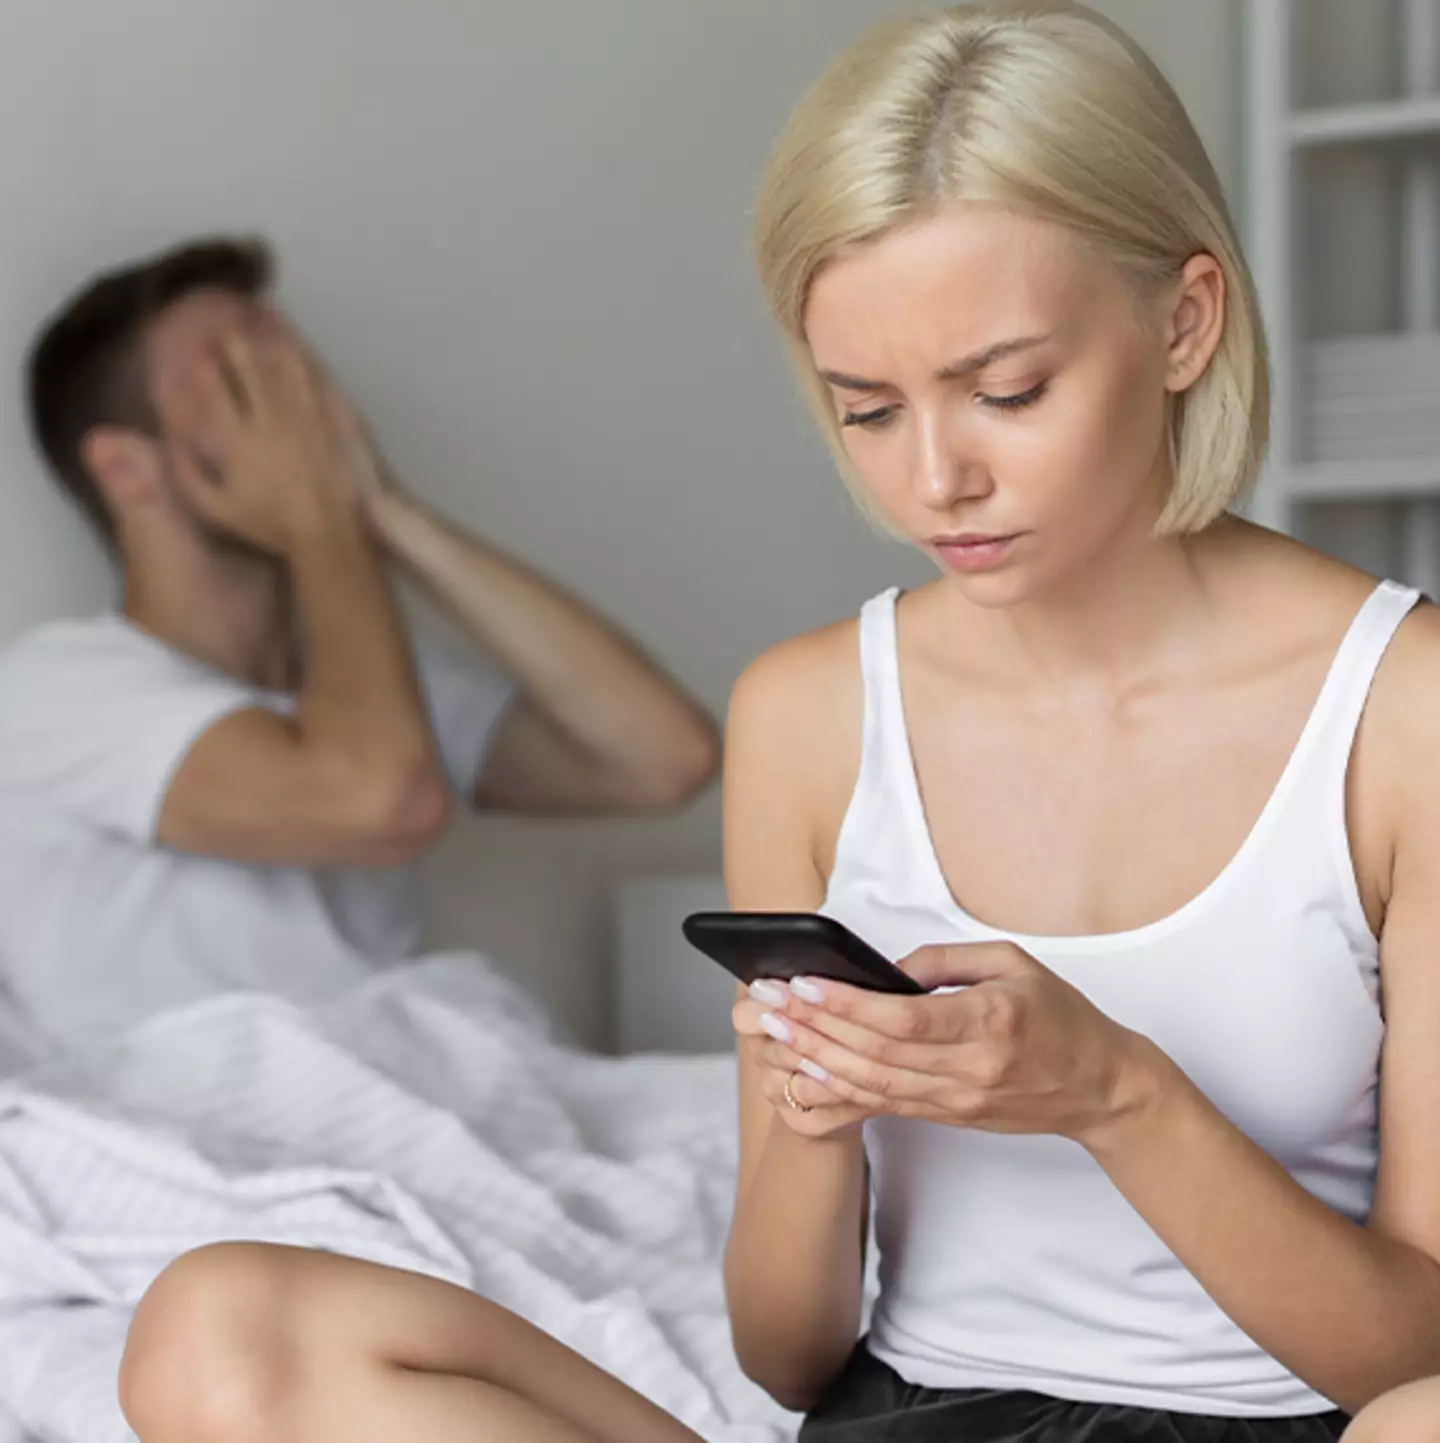 Health expert warns over the dangers of phubbing in your relationship